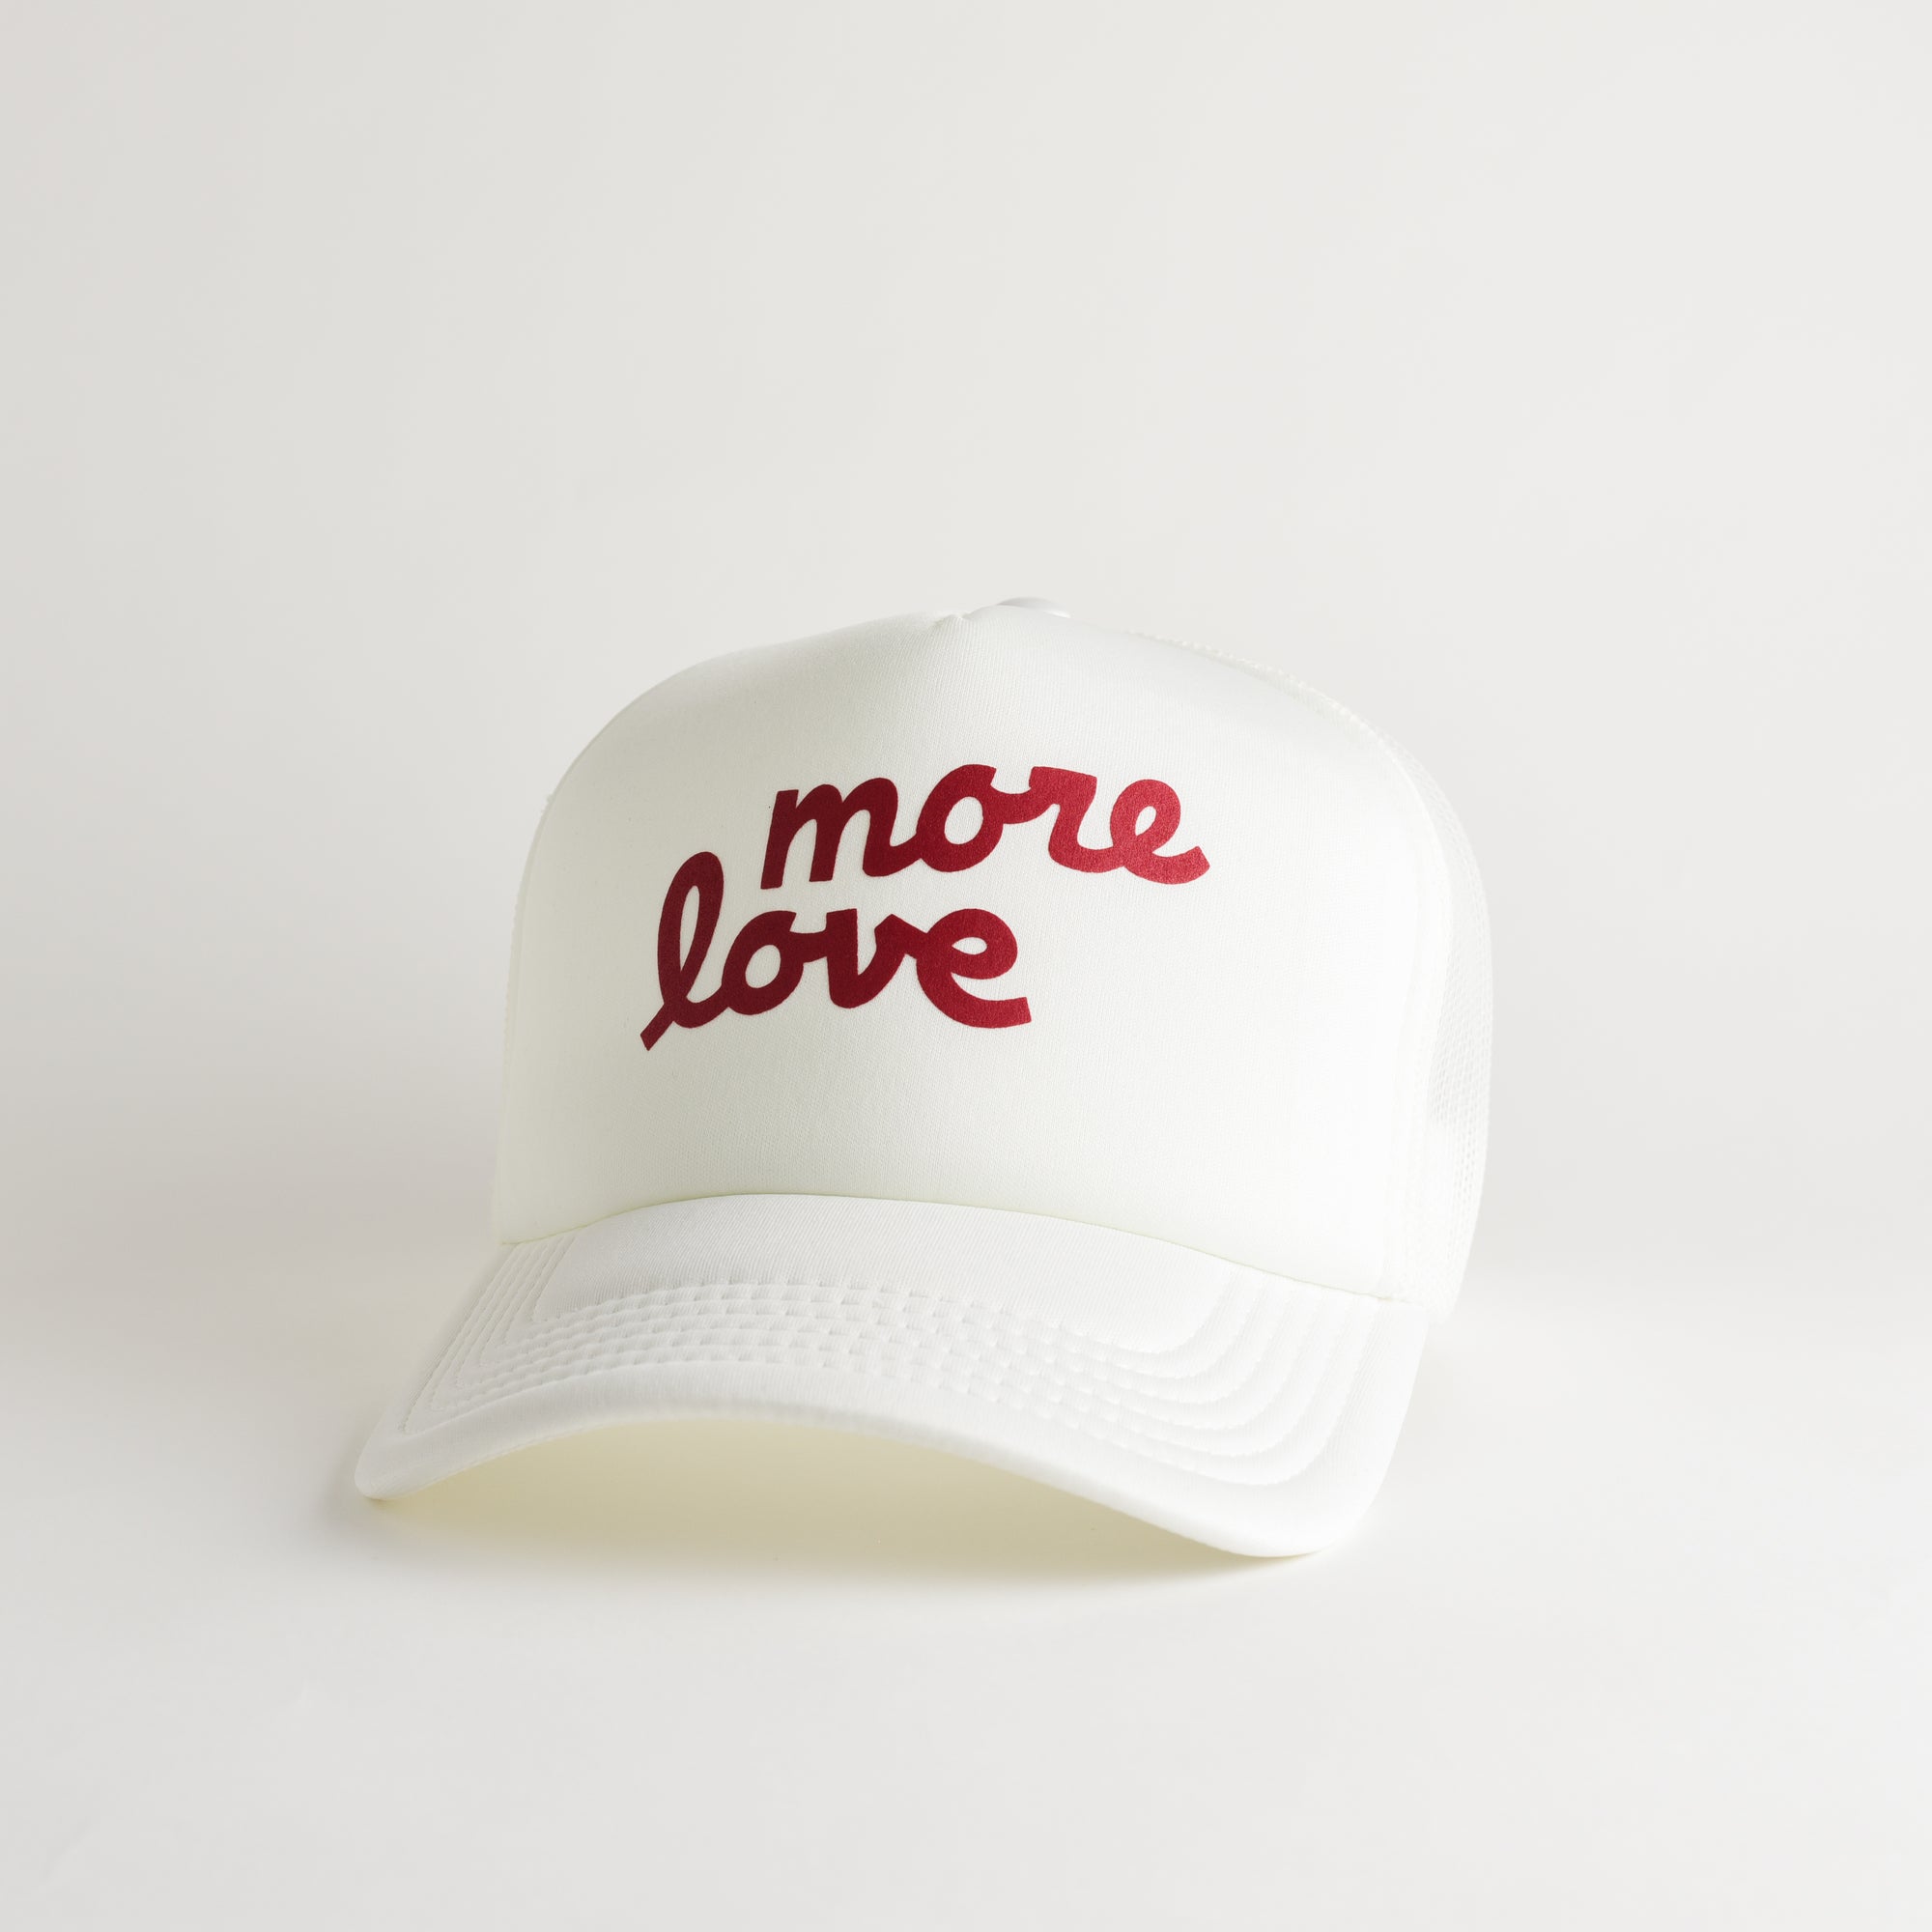 More Love Recycled Trucker Hat